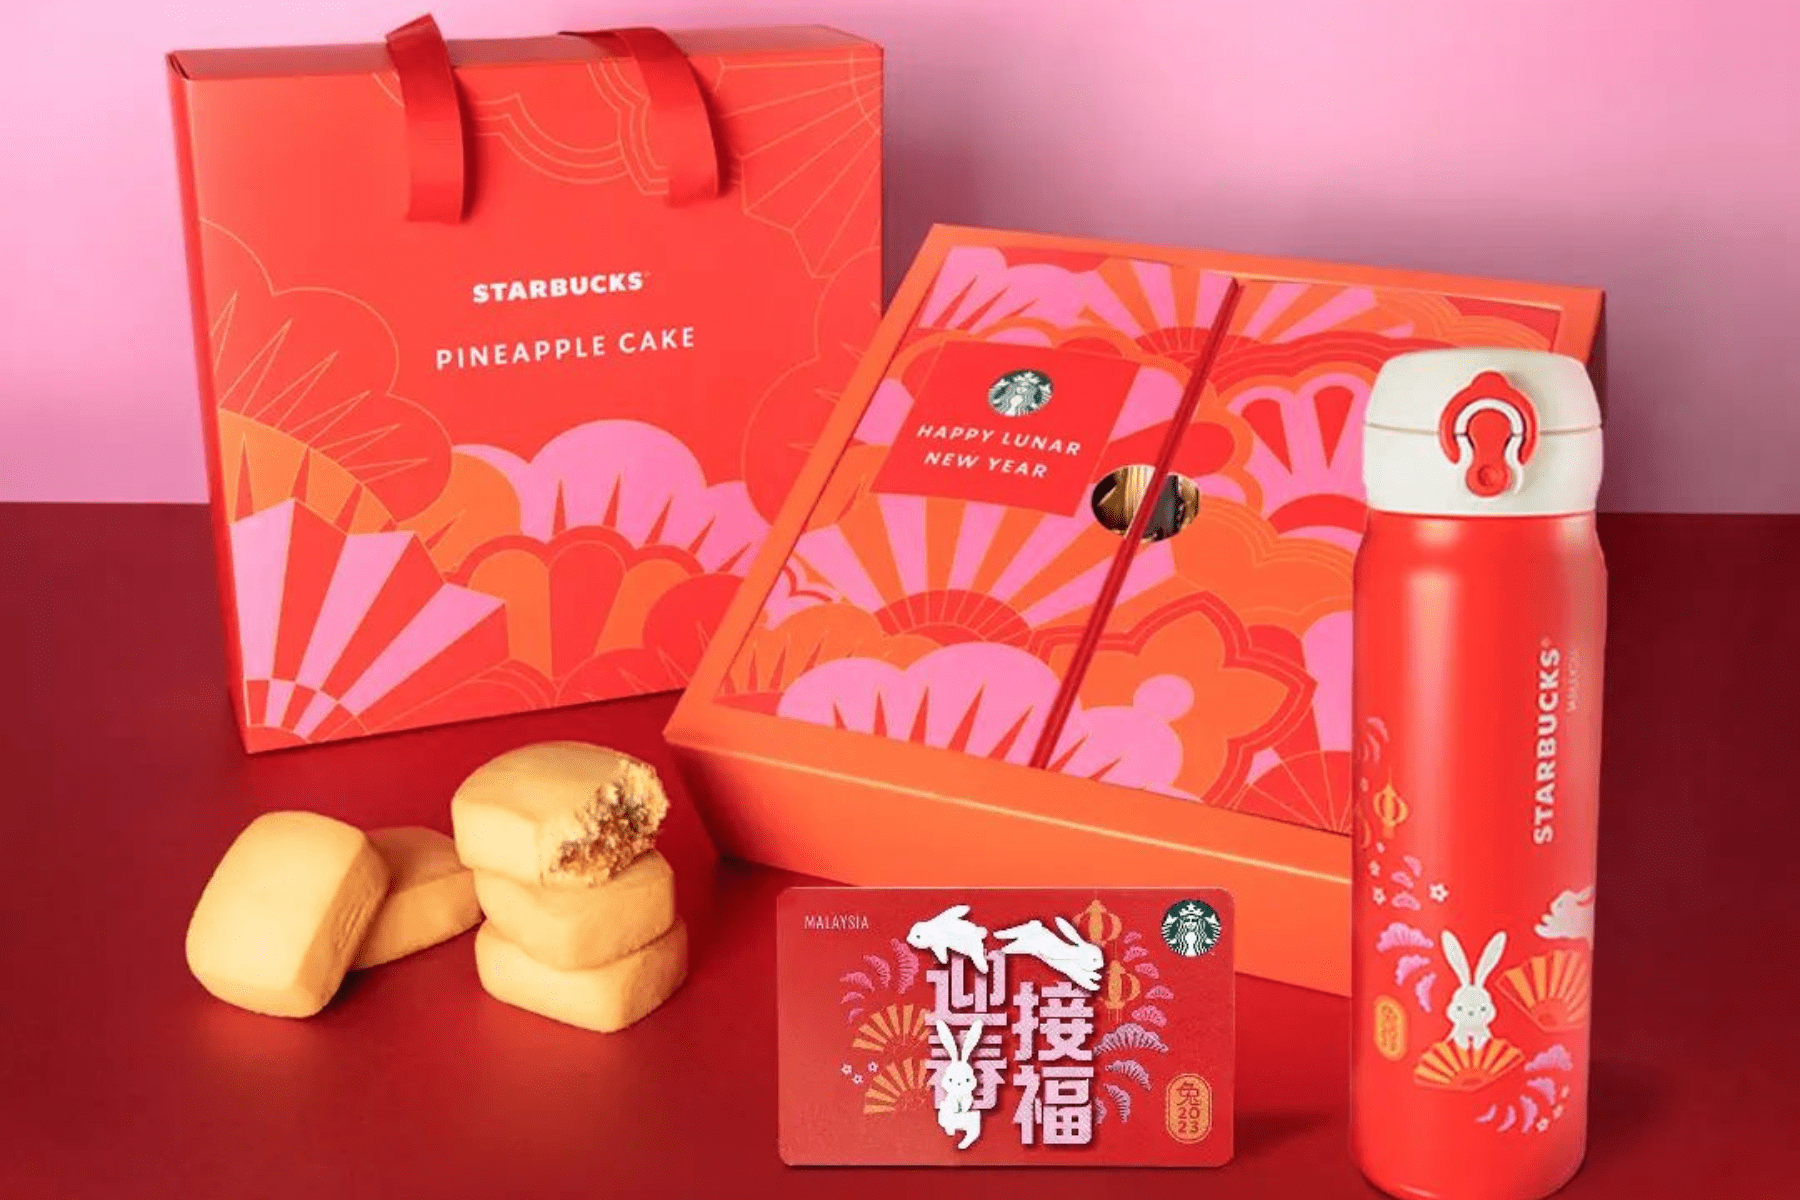 Lunar New Year Gifts Ideas: What is a good Chinese New Year Gift?